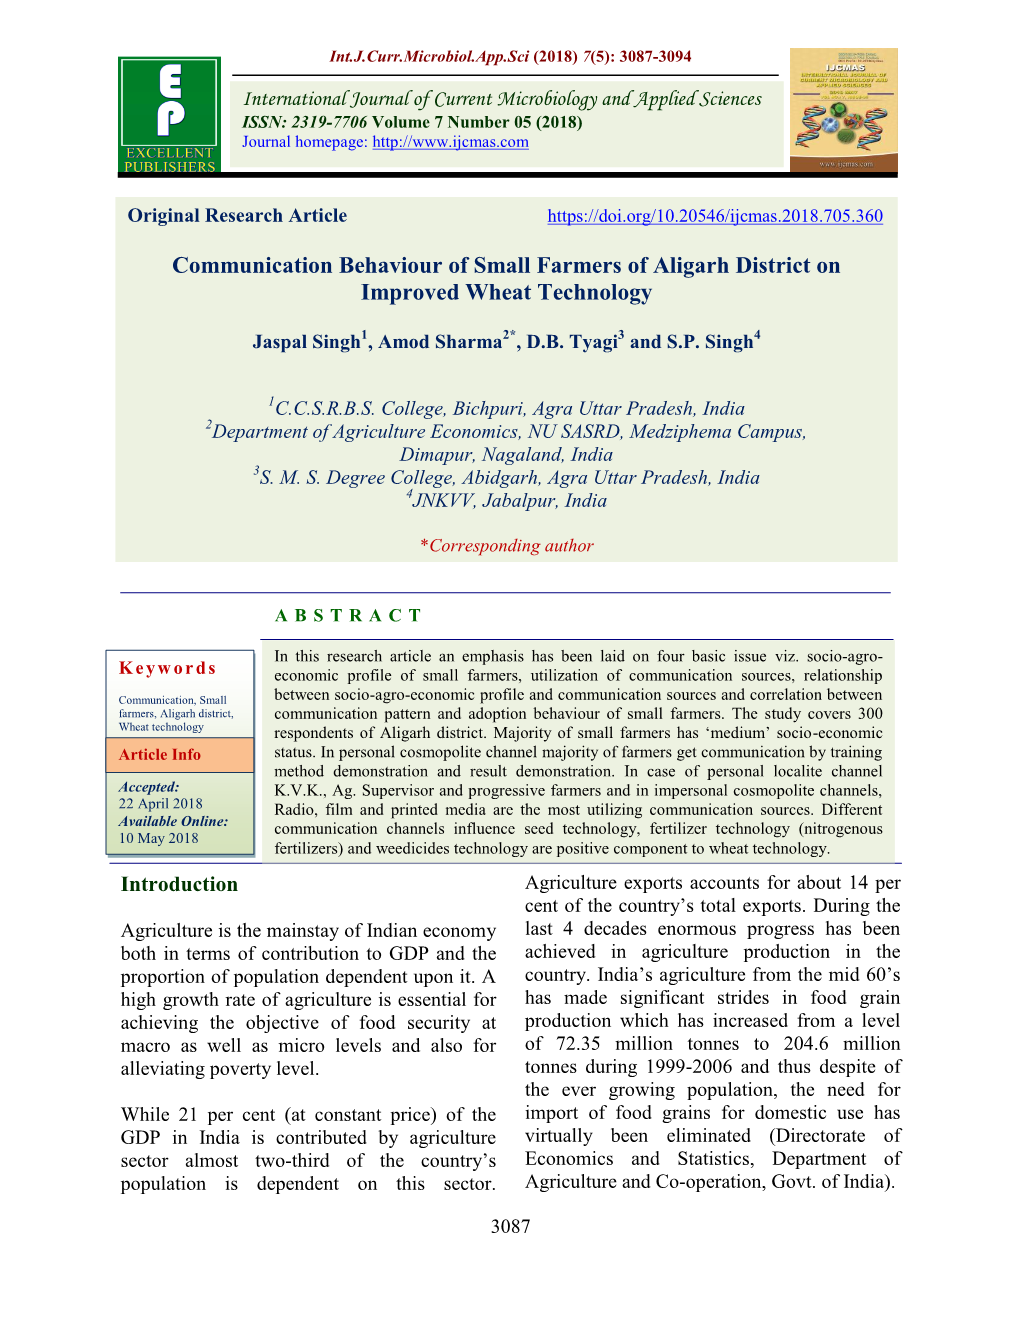 Communication Behaviour of Small Farmers of Aligarh District on Improved Wheat Technology